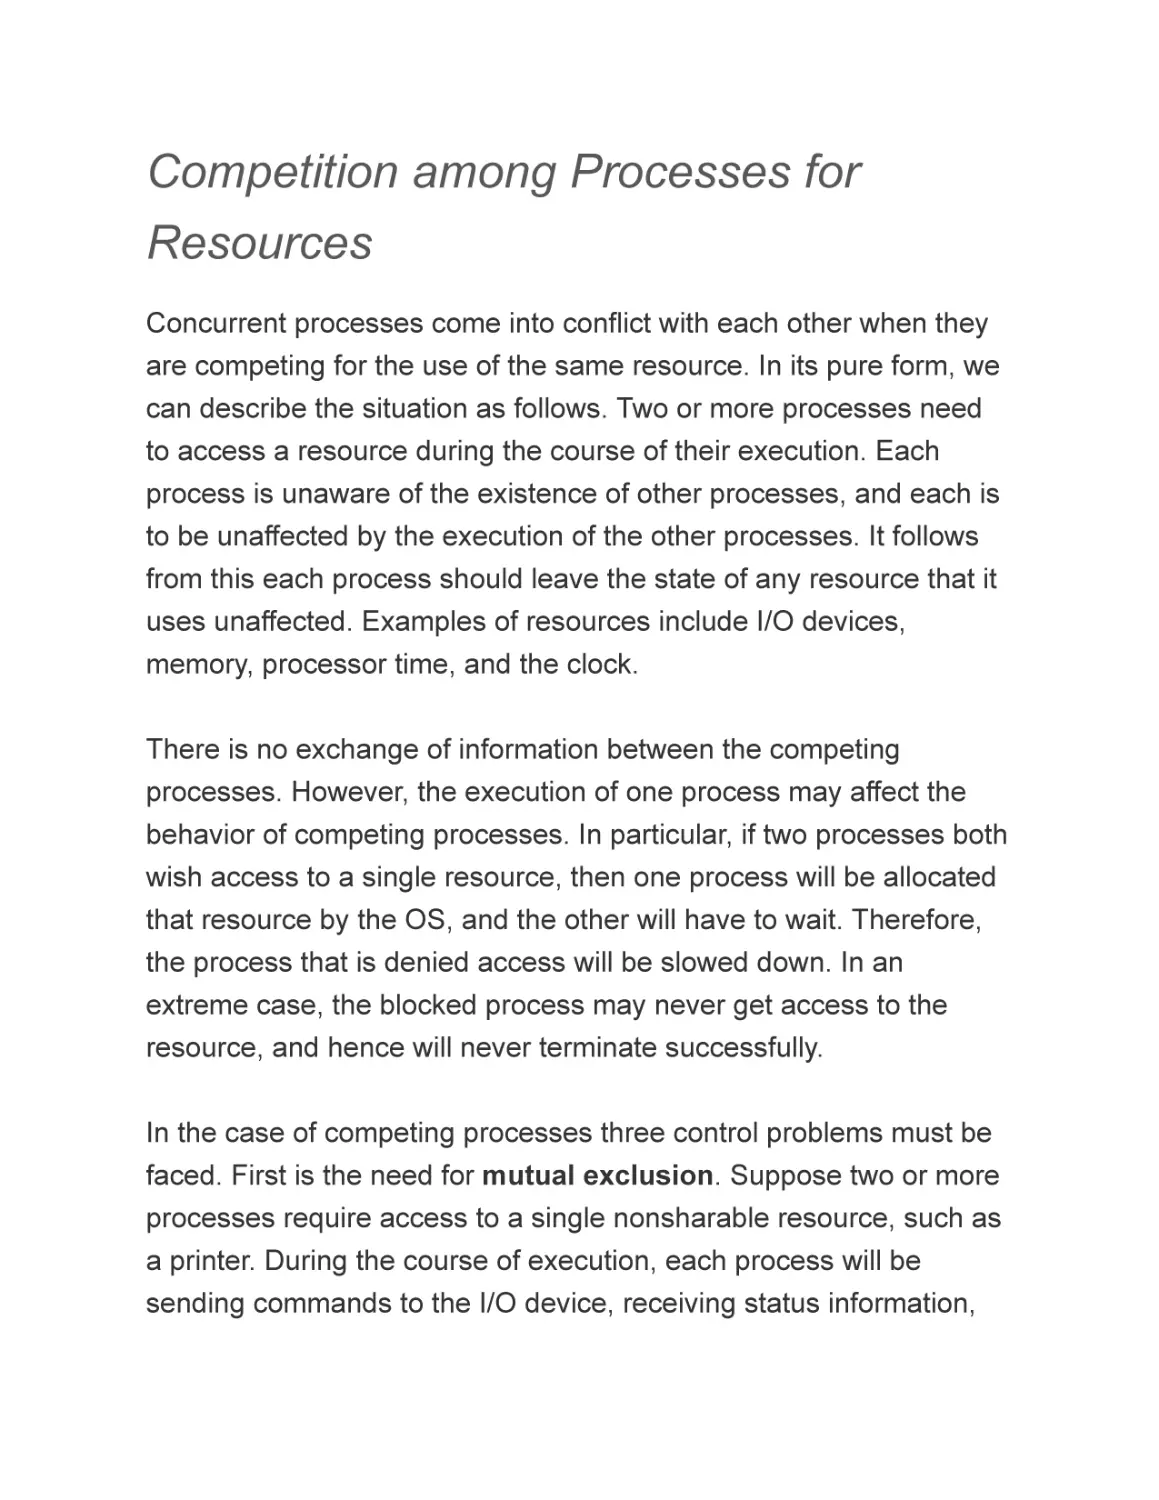 Competition among Processes for Resources